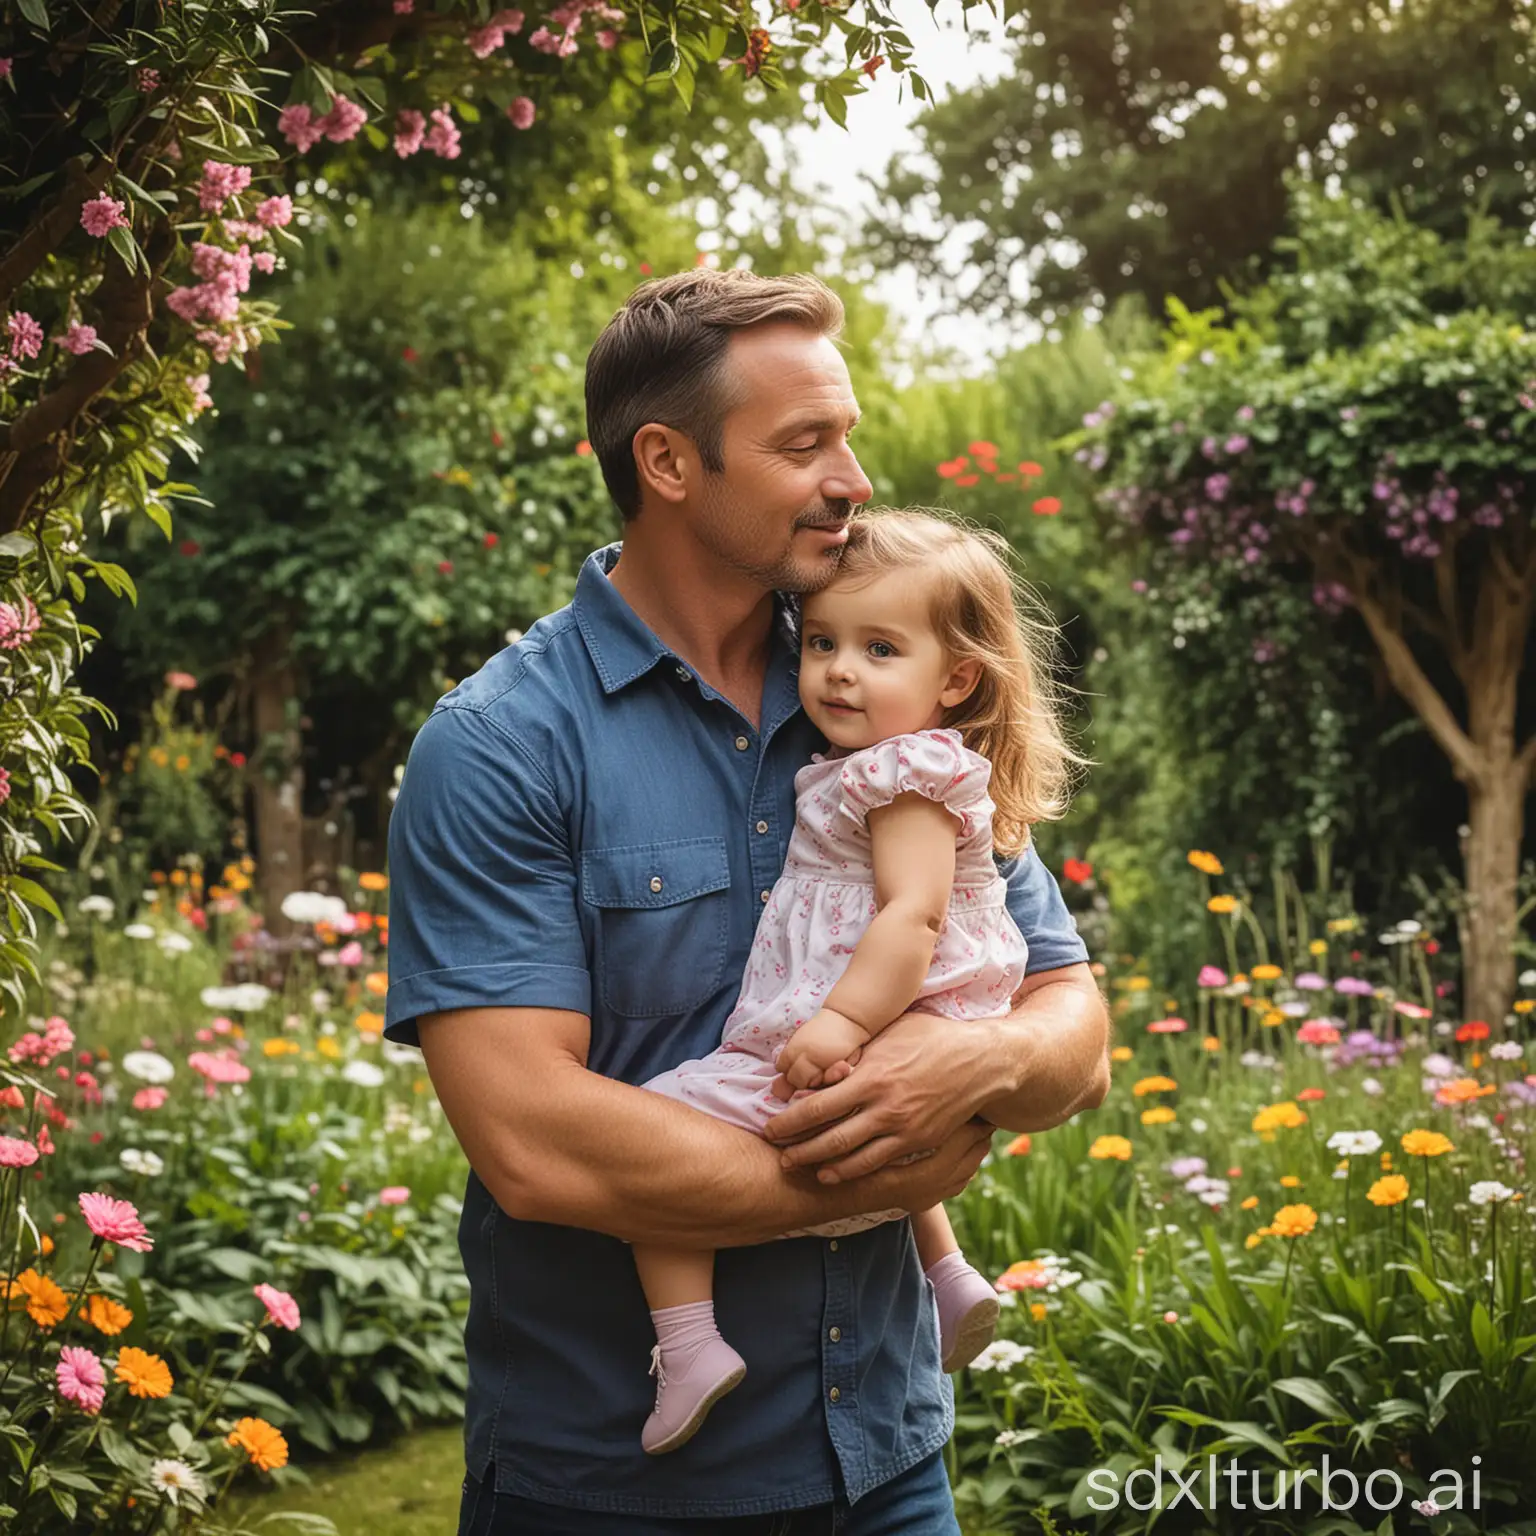  DAD WITH GIRL 
KID IN BEAUTIFUL GARDEN FANTACY BACKGROUND